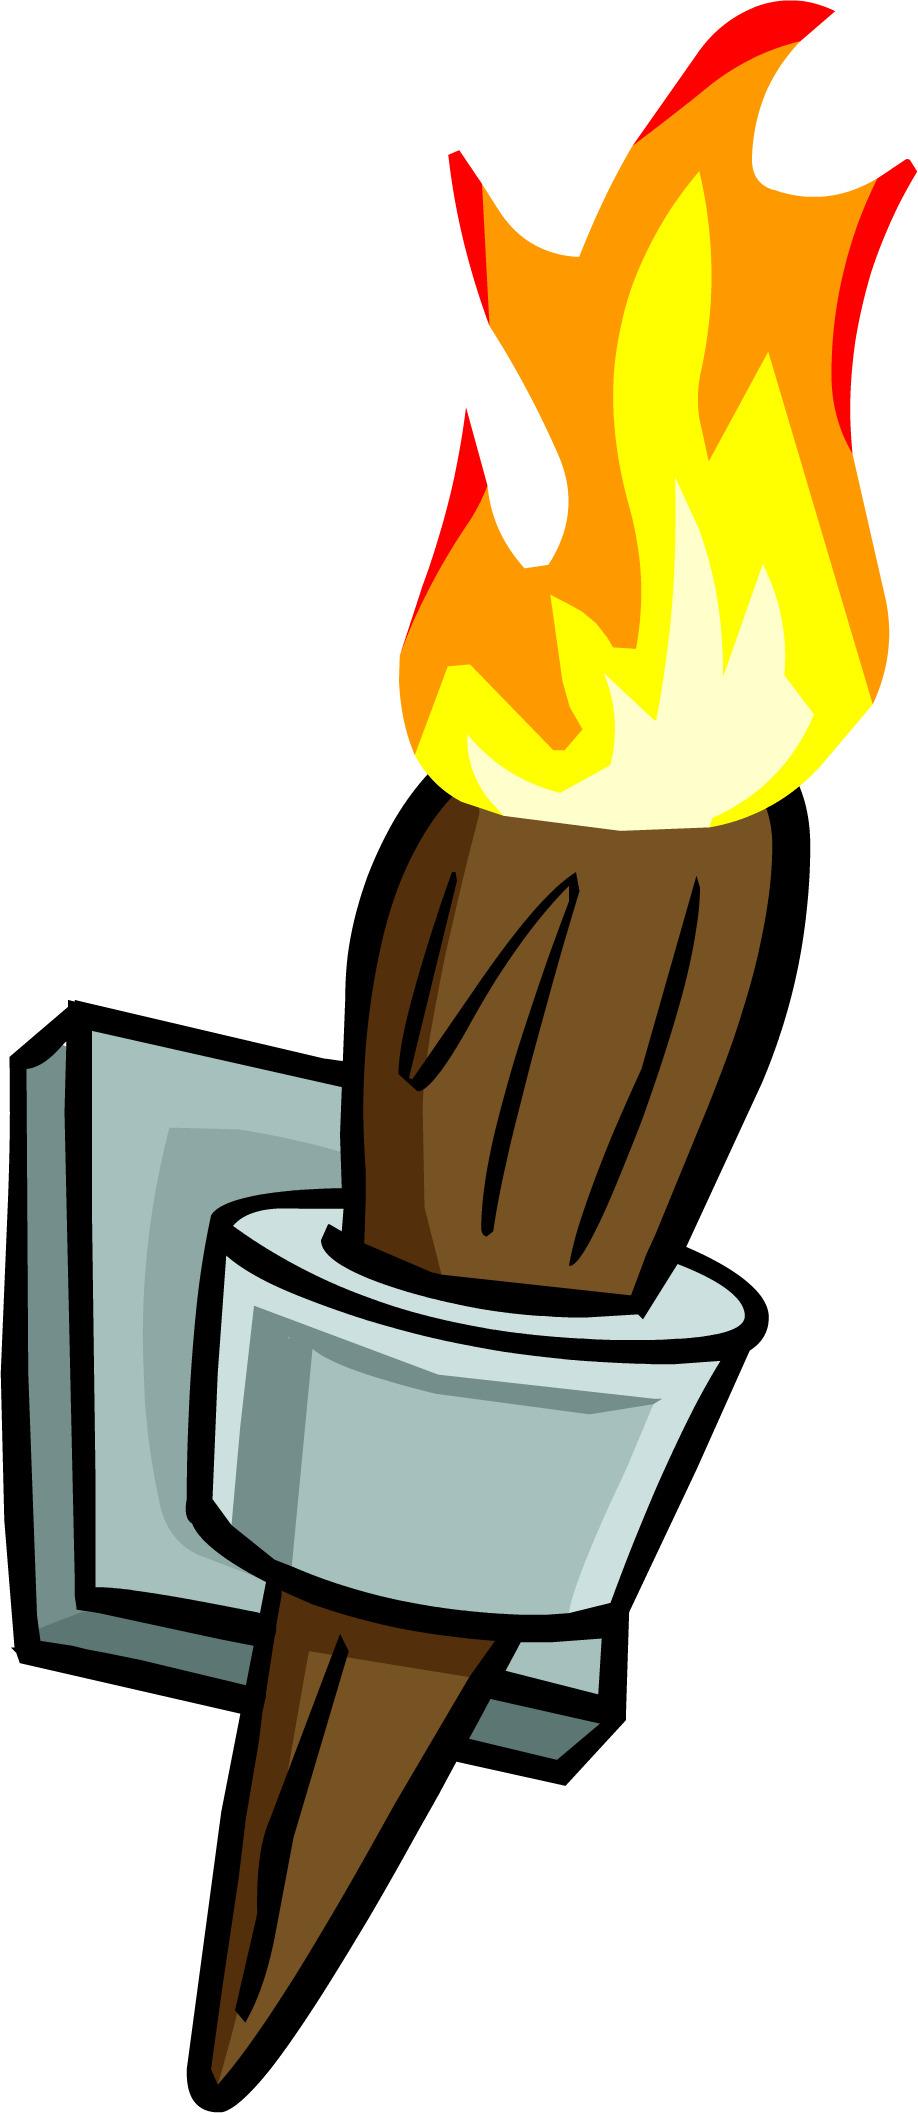 Wall Torch Clipart png transparent